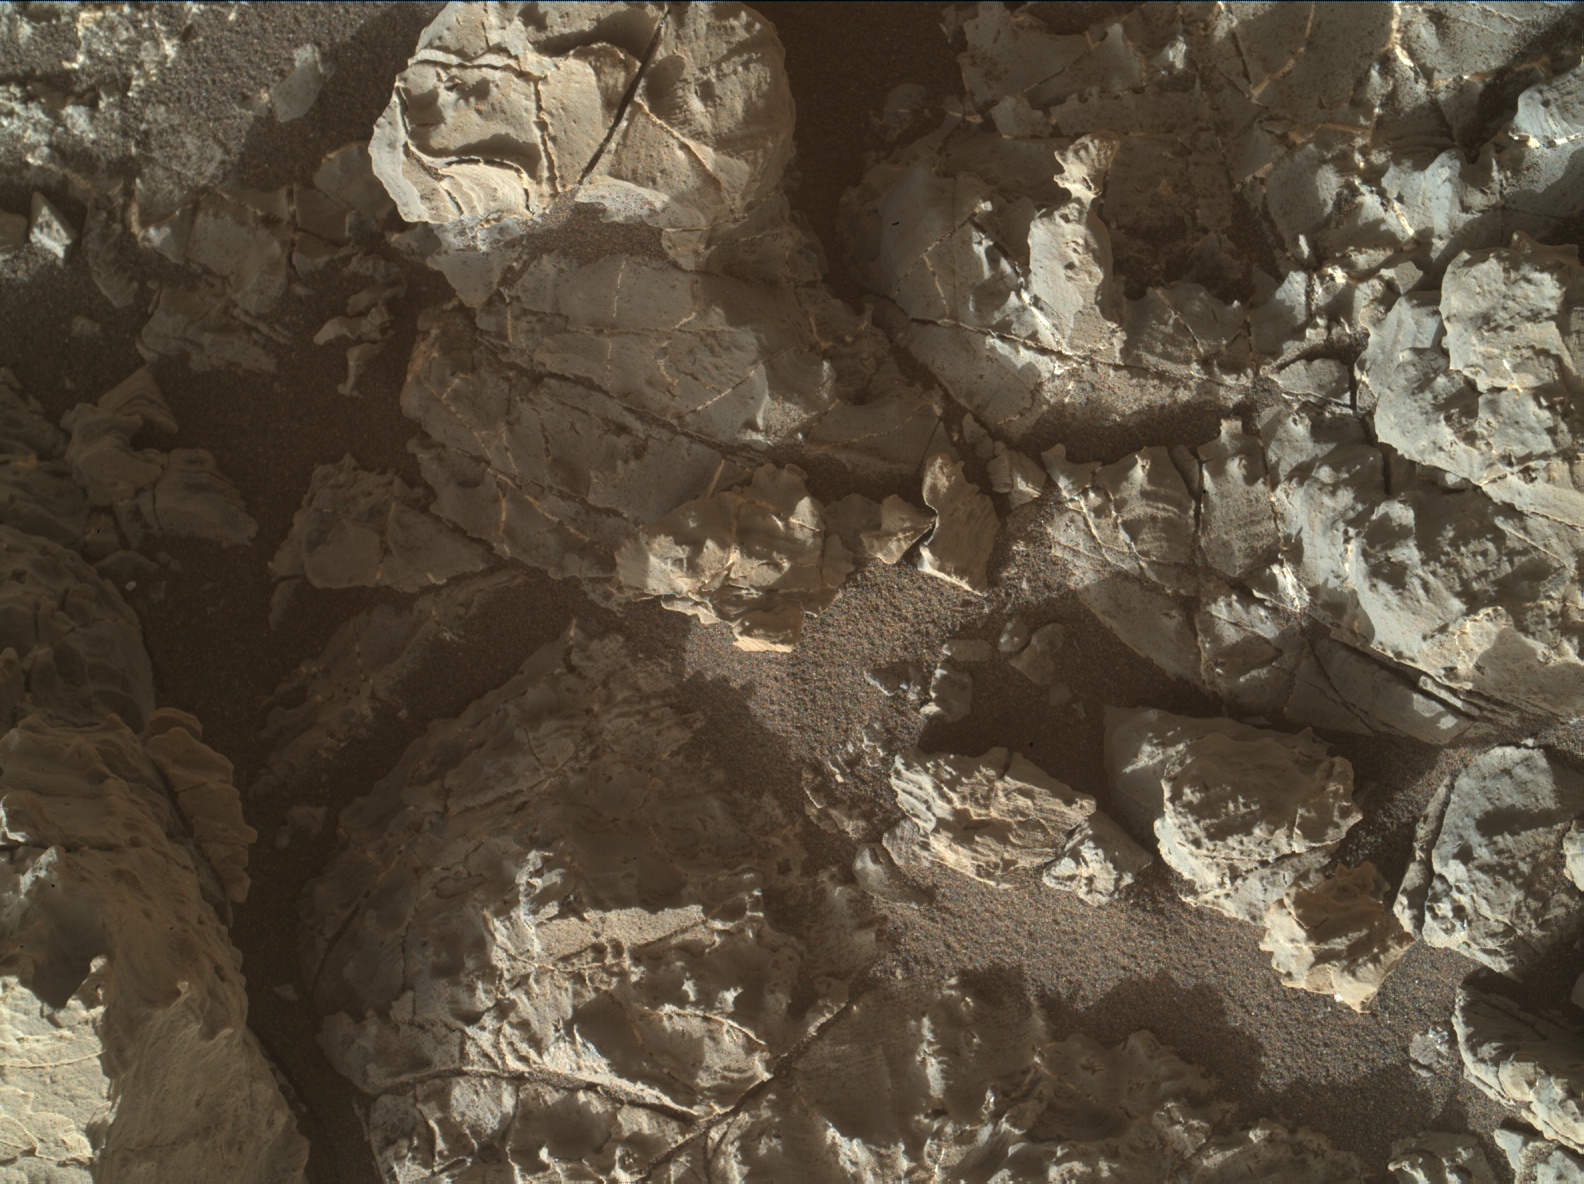 Nasa's Mars rover Curiosity acquired this image using its Mars Hand Lens Imager (MAHLI) on Sol 1932